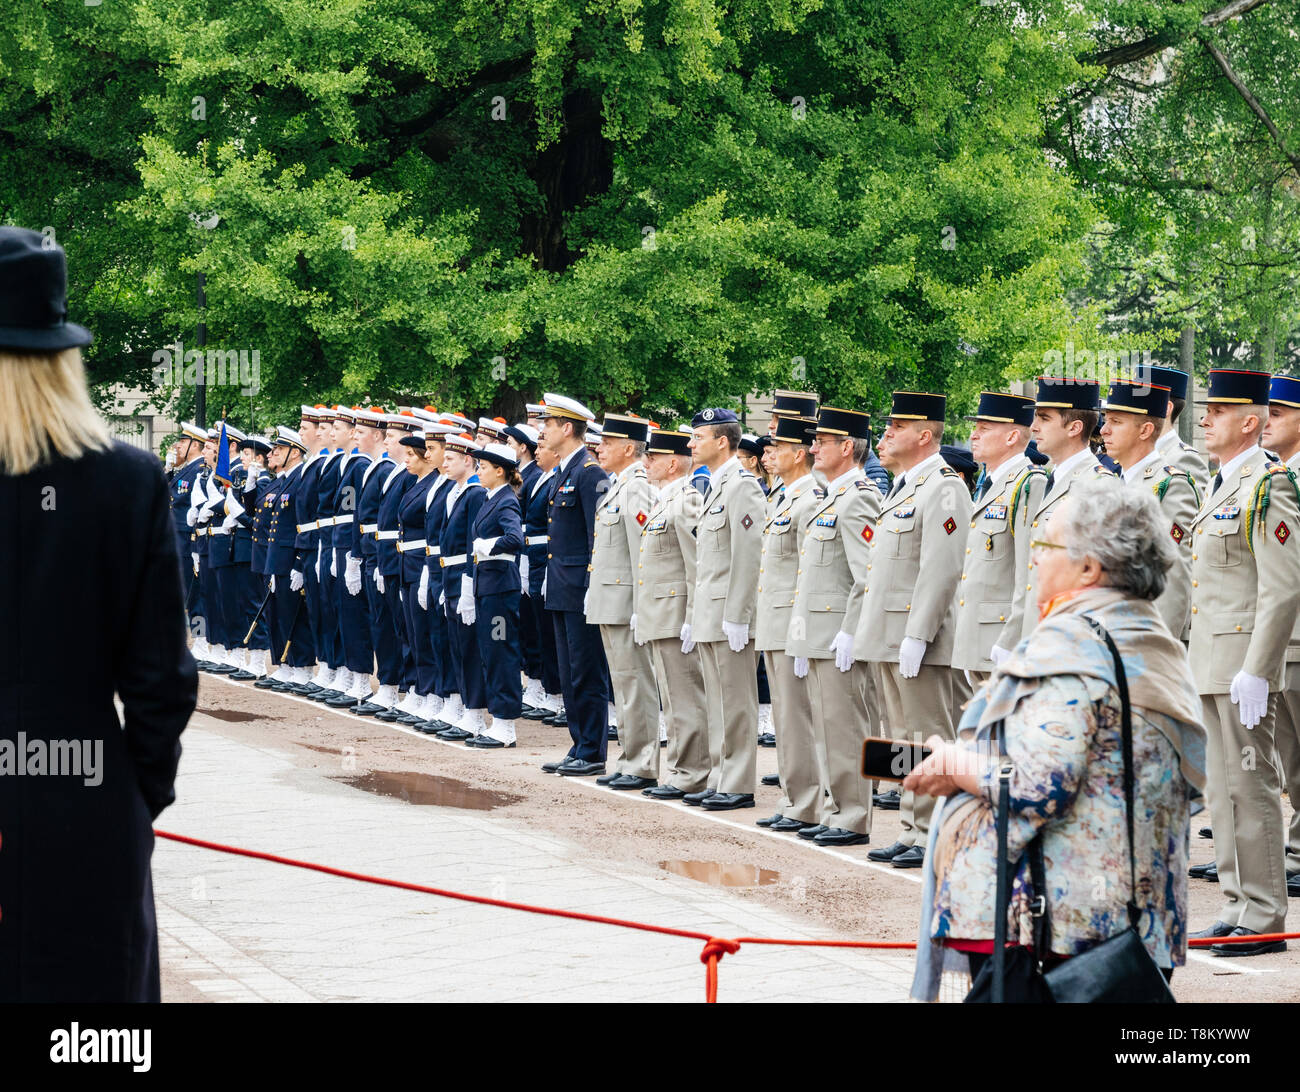 STRASBOURG, FRANCE - MAY 8, 2017: Side view of large group of military personnel at ceremony to mark Western allies World War Two victory Armistice in Europe victory over Nazi  Stock Photo